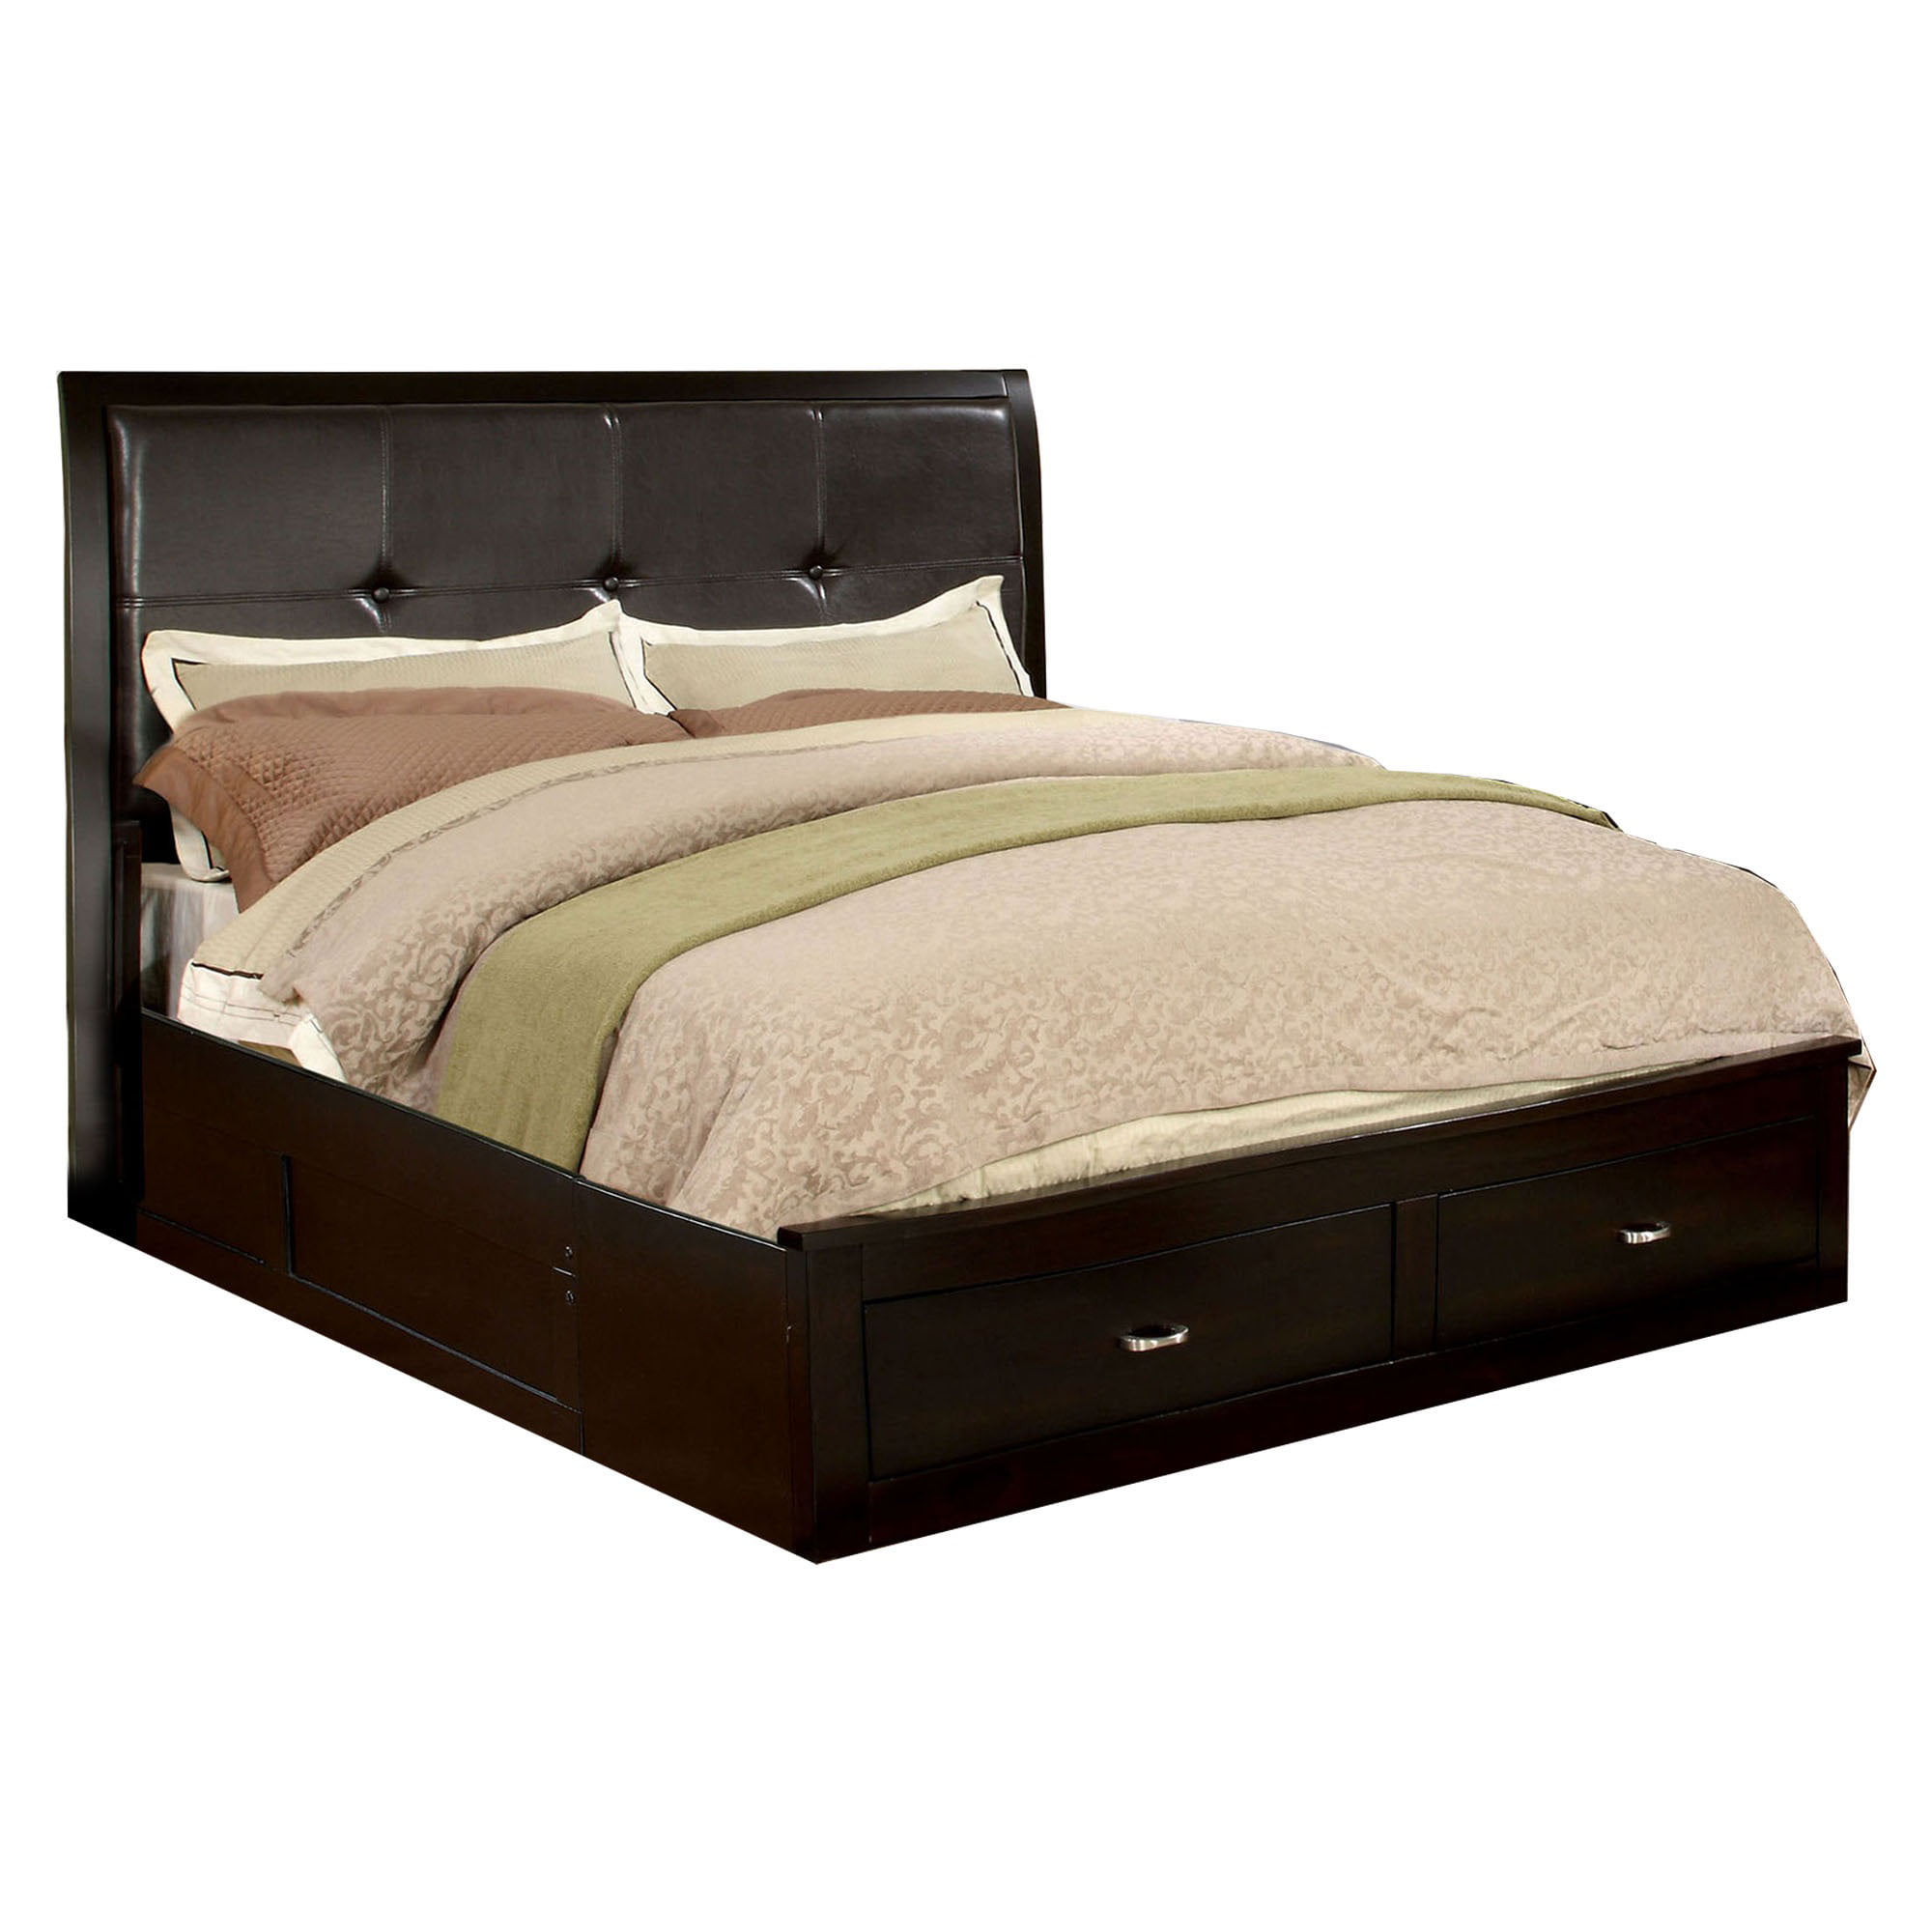 Modern Full Size Storage Platform bed with Leatherette Headboard